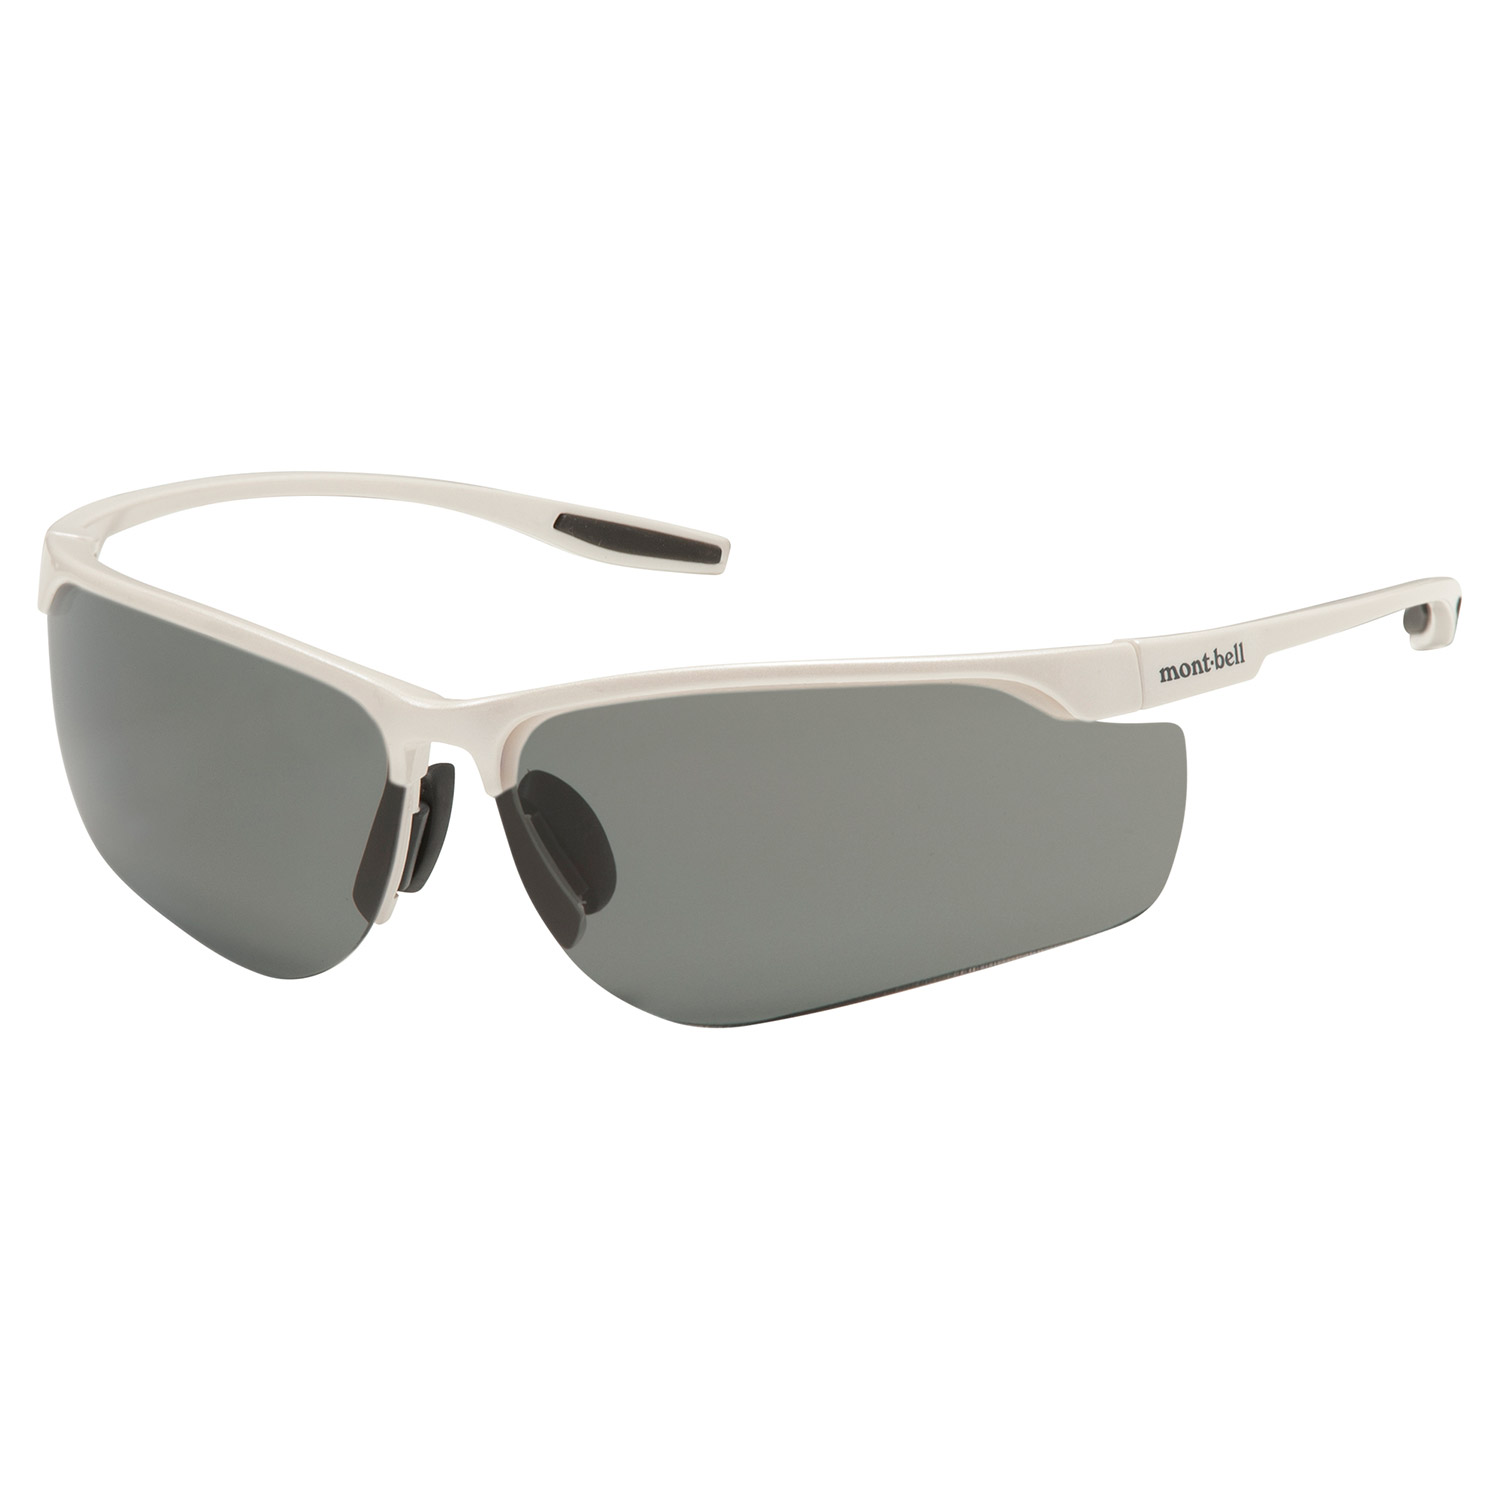 Trail Sunglasses Wide Lens Euro | PL Montbell